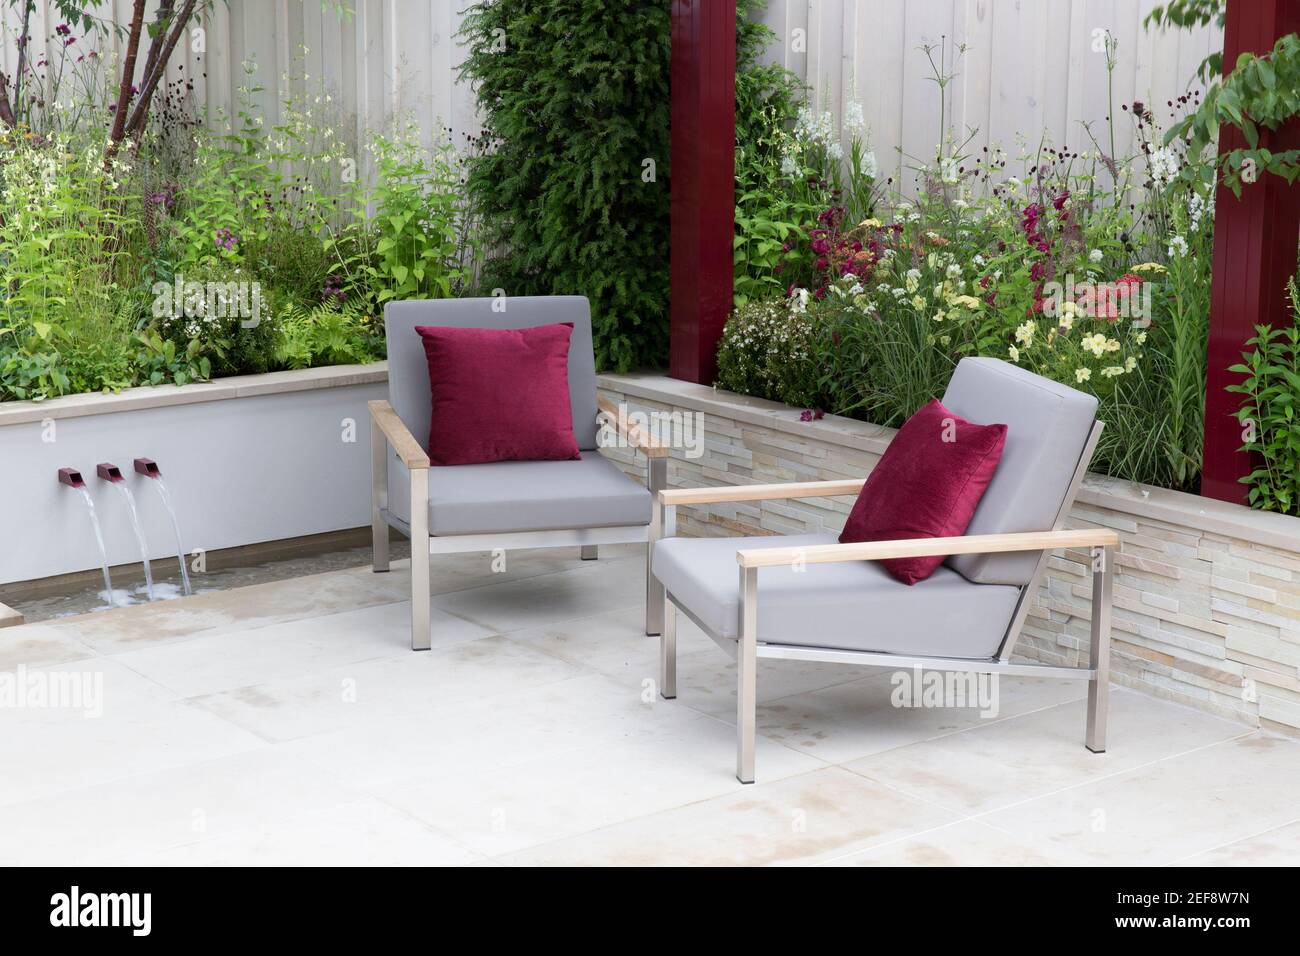 Modern urban stone garden patio with garden furniture chairs with red cushions - raised bed beds garden flower border - Summer - London UK England Stock Photo